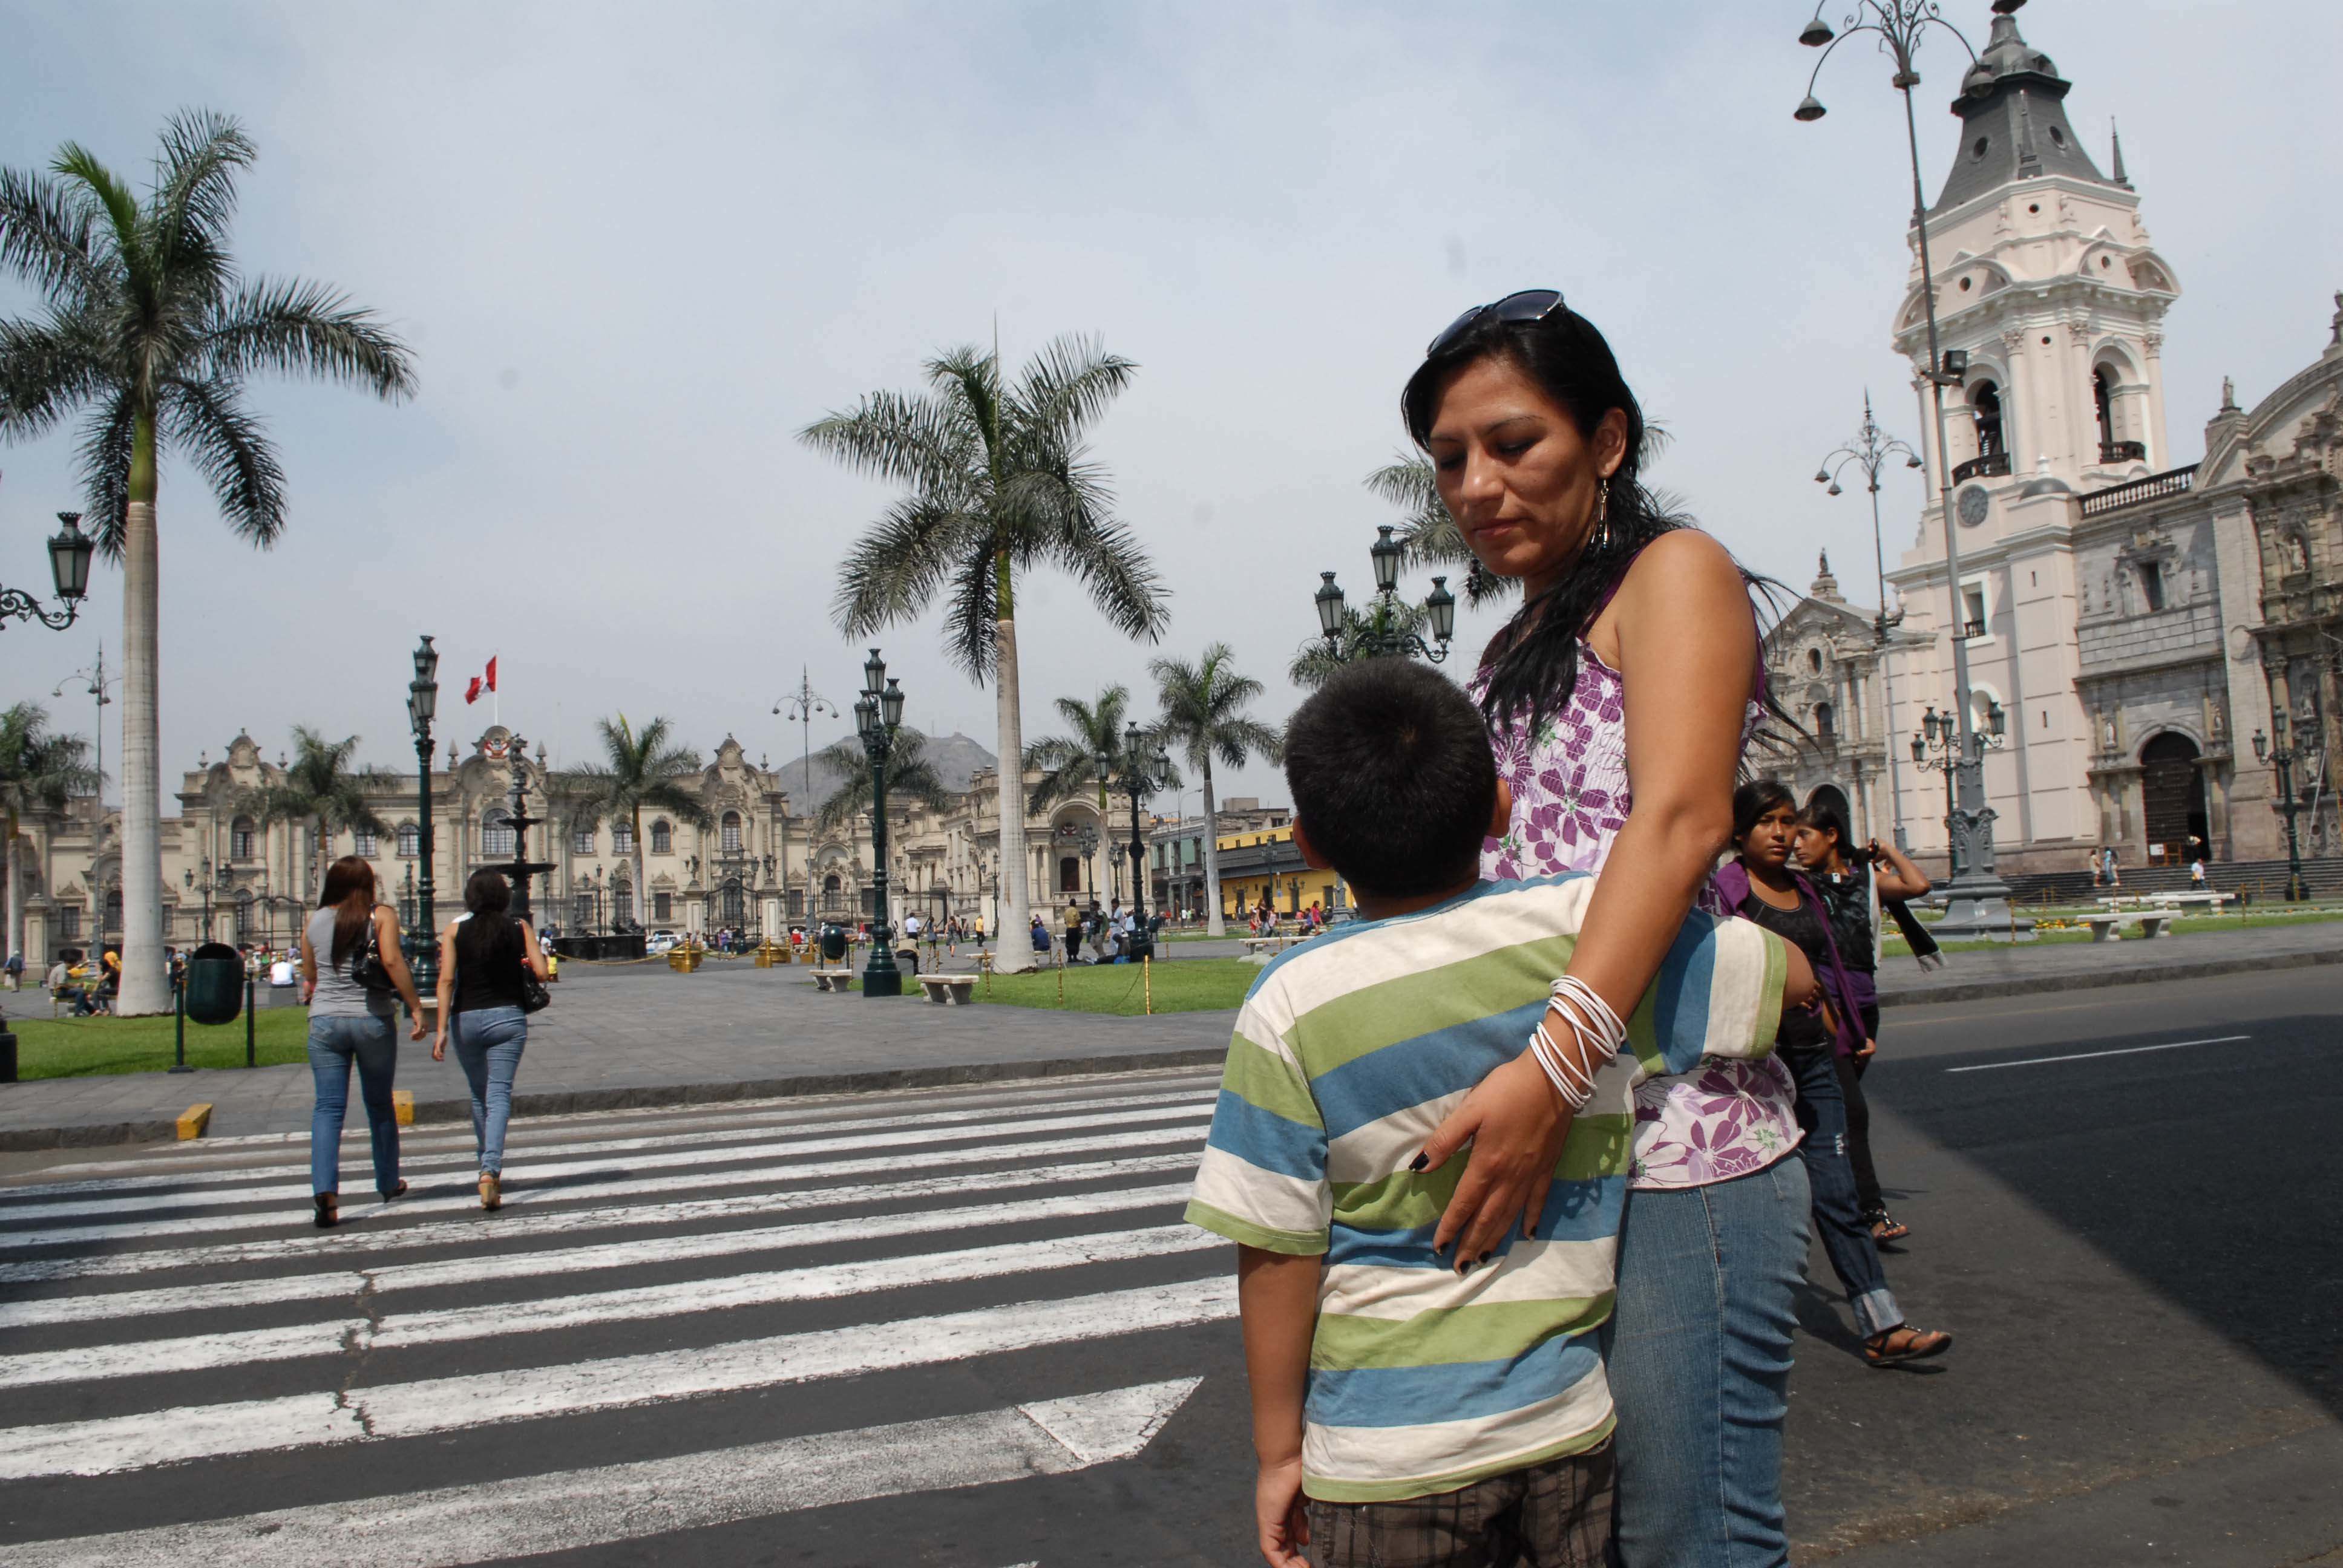 Diana Canessa and her son. Image by Kelly Hearn, Peru, 2010.